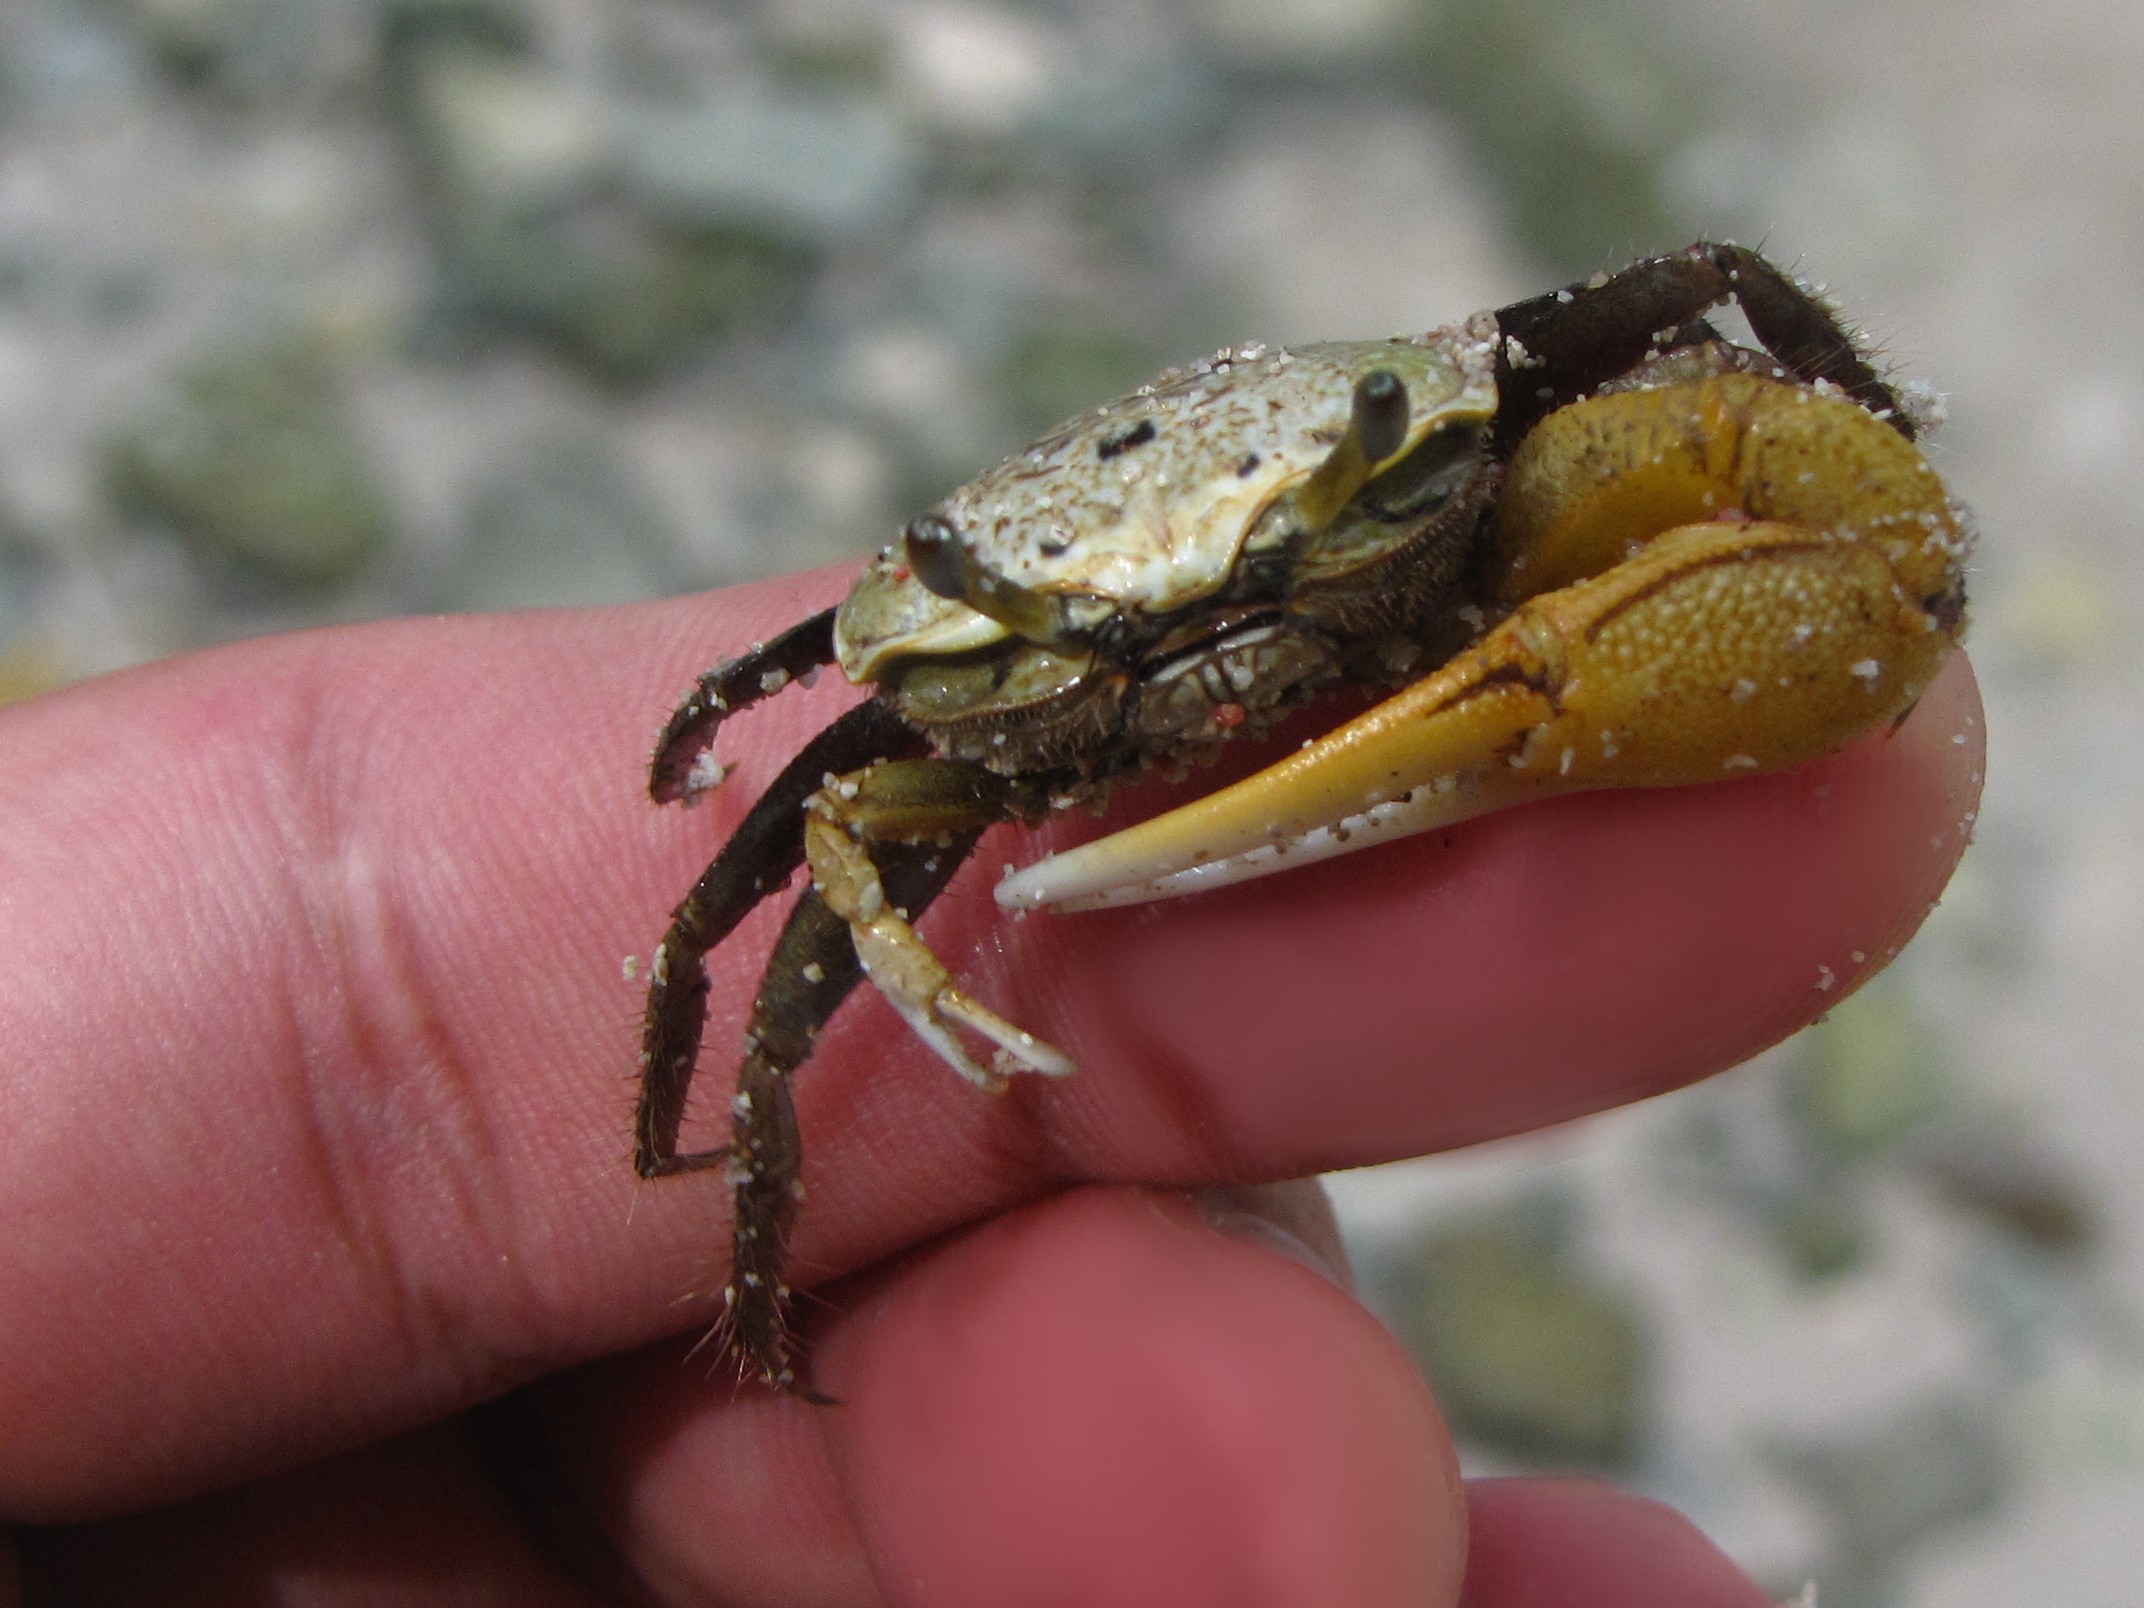 a hand holding a crab with a large yellow belly